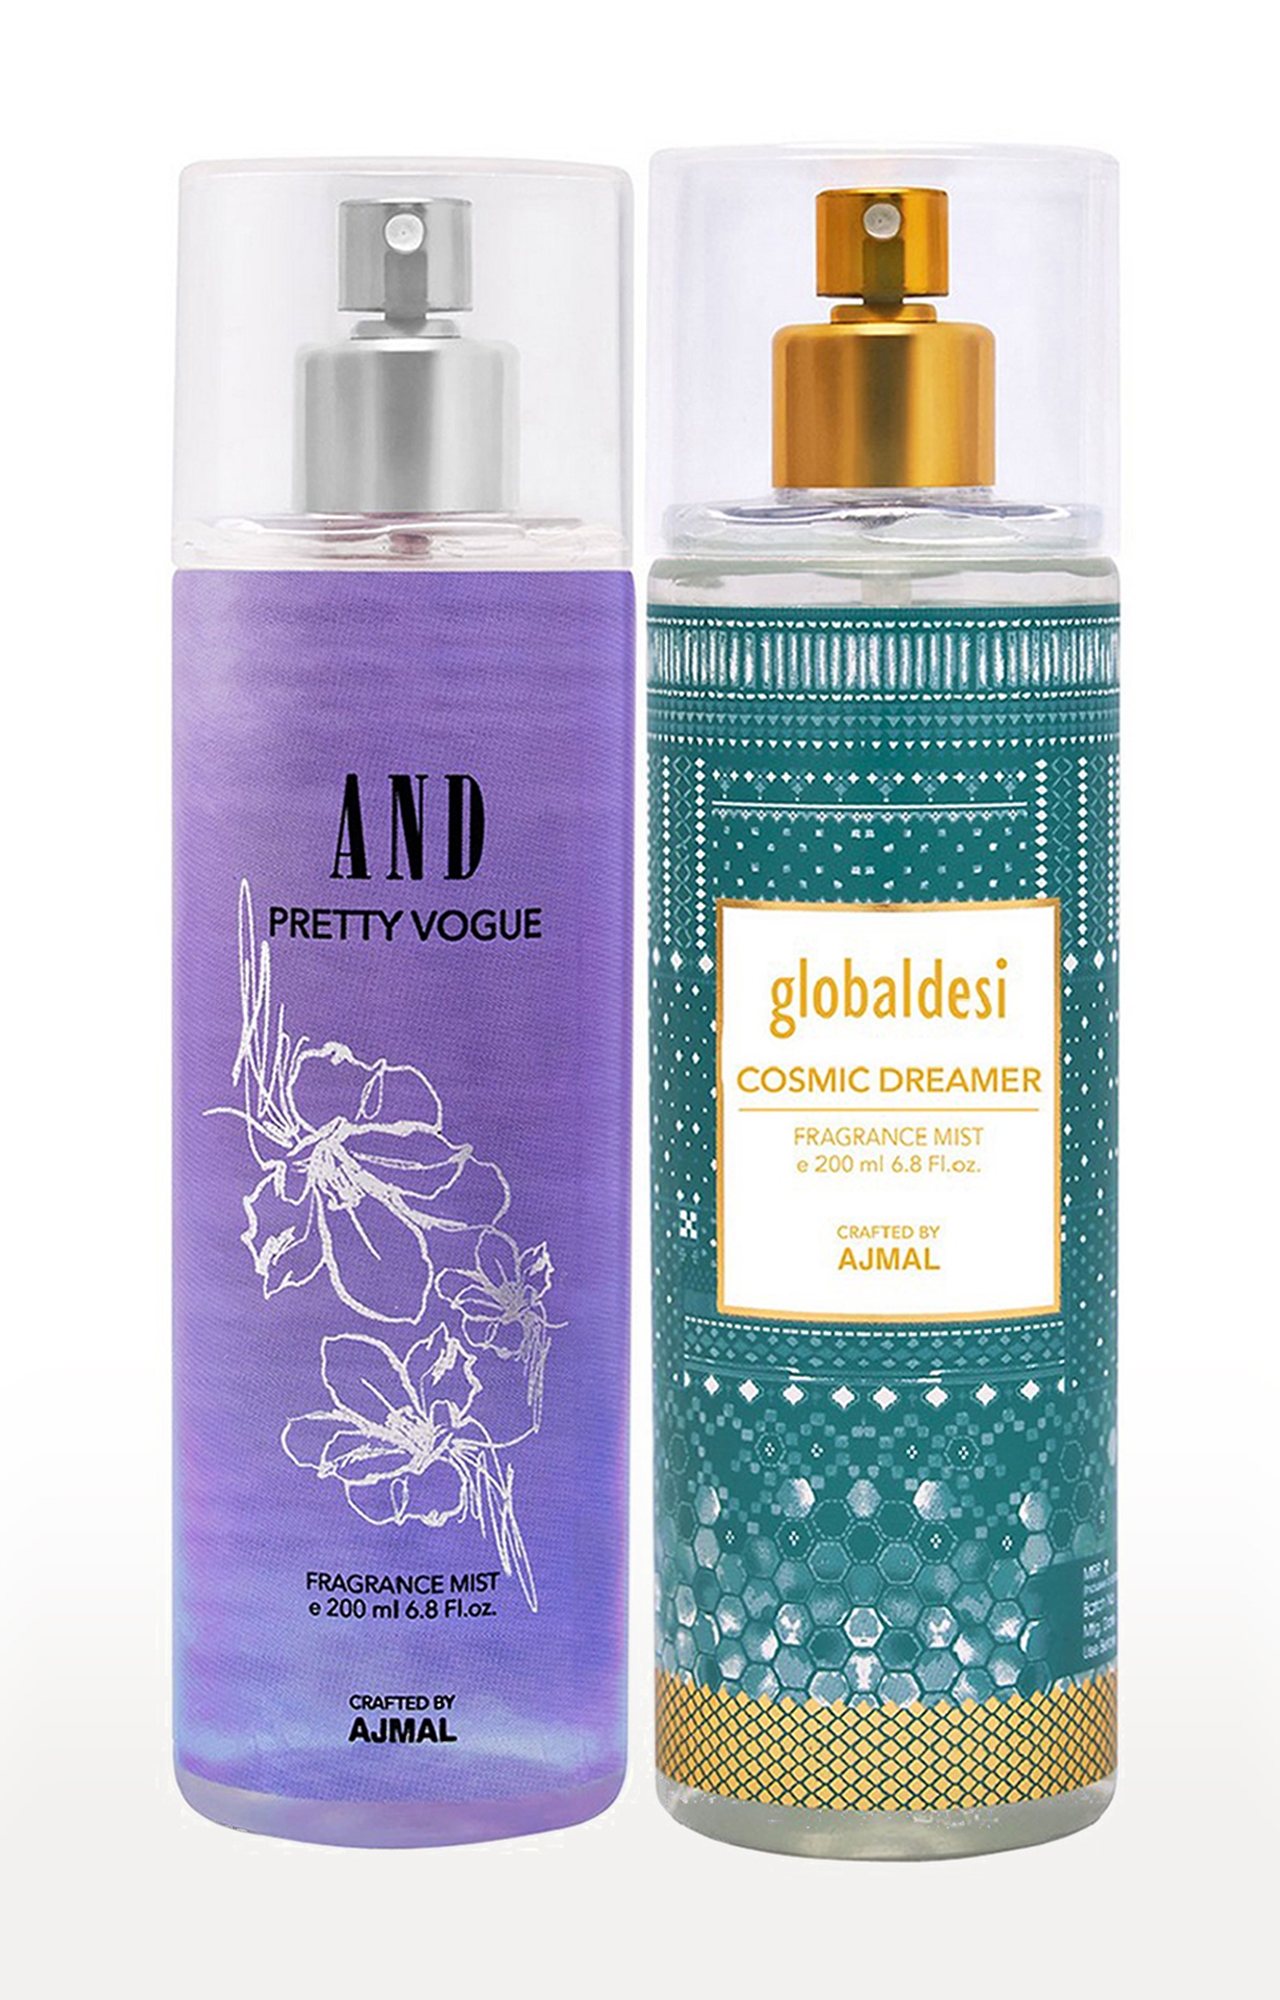 AND Crafted By Ajmal | AND Pretty Vogue Body Mist 200ML & Global Desi Cosmic Dreamer Body Mist 200ML Long Lasting Scent Spray Gift For Women Perfume FREE